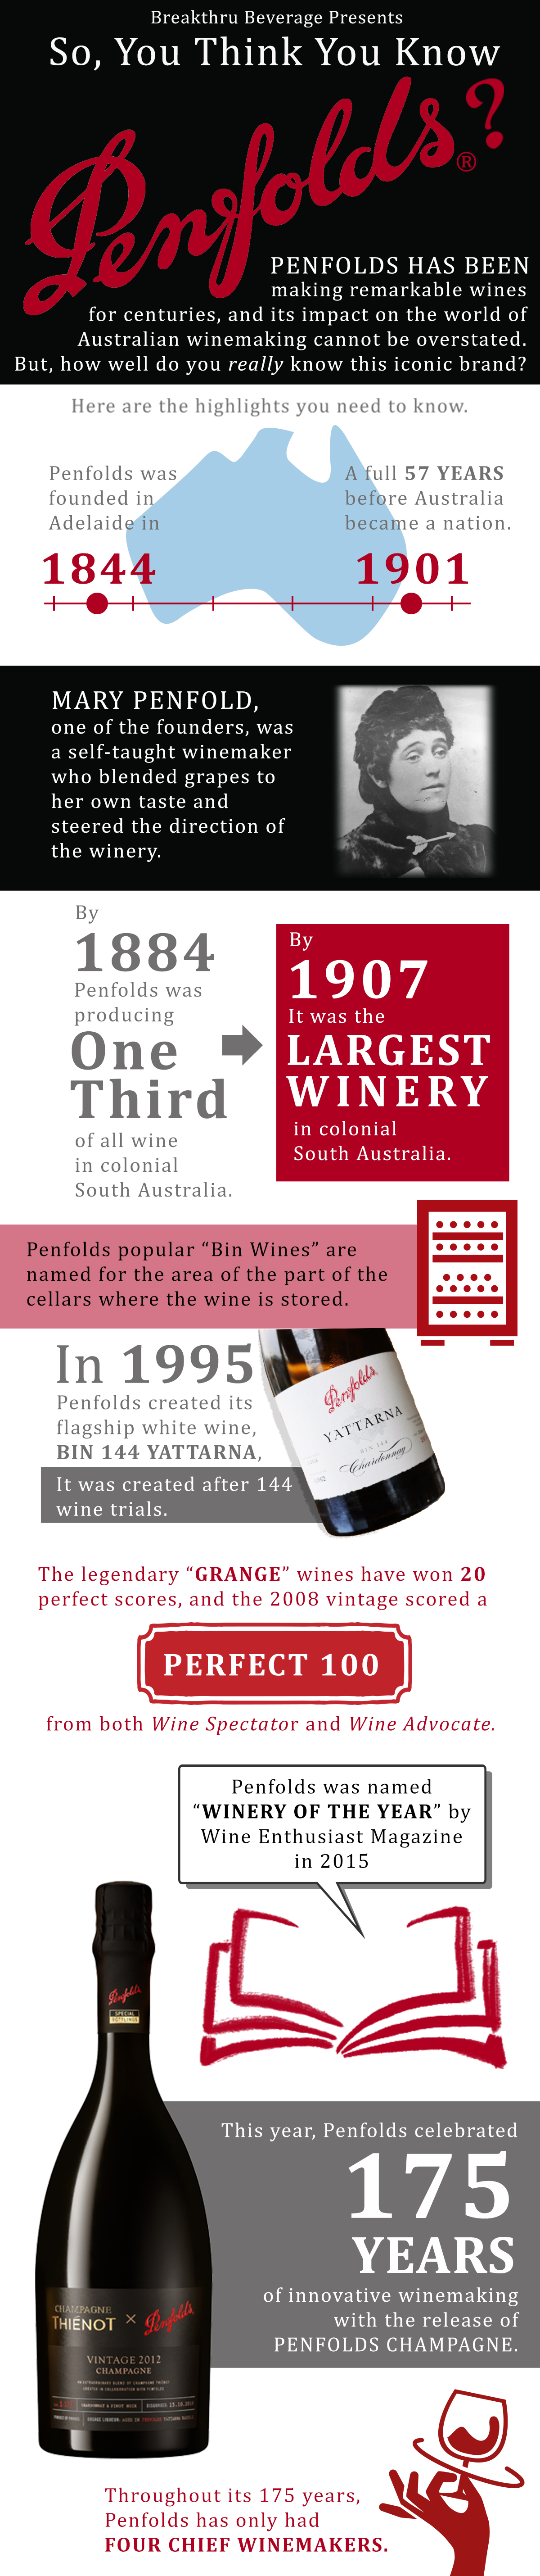 So, You Think You Know Penfolds?